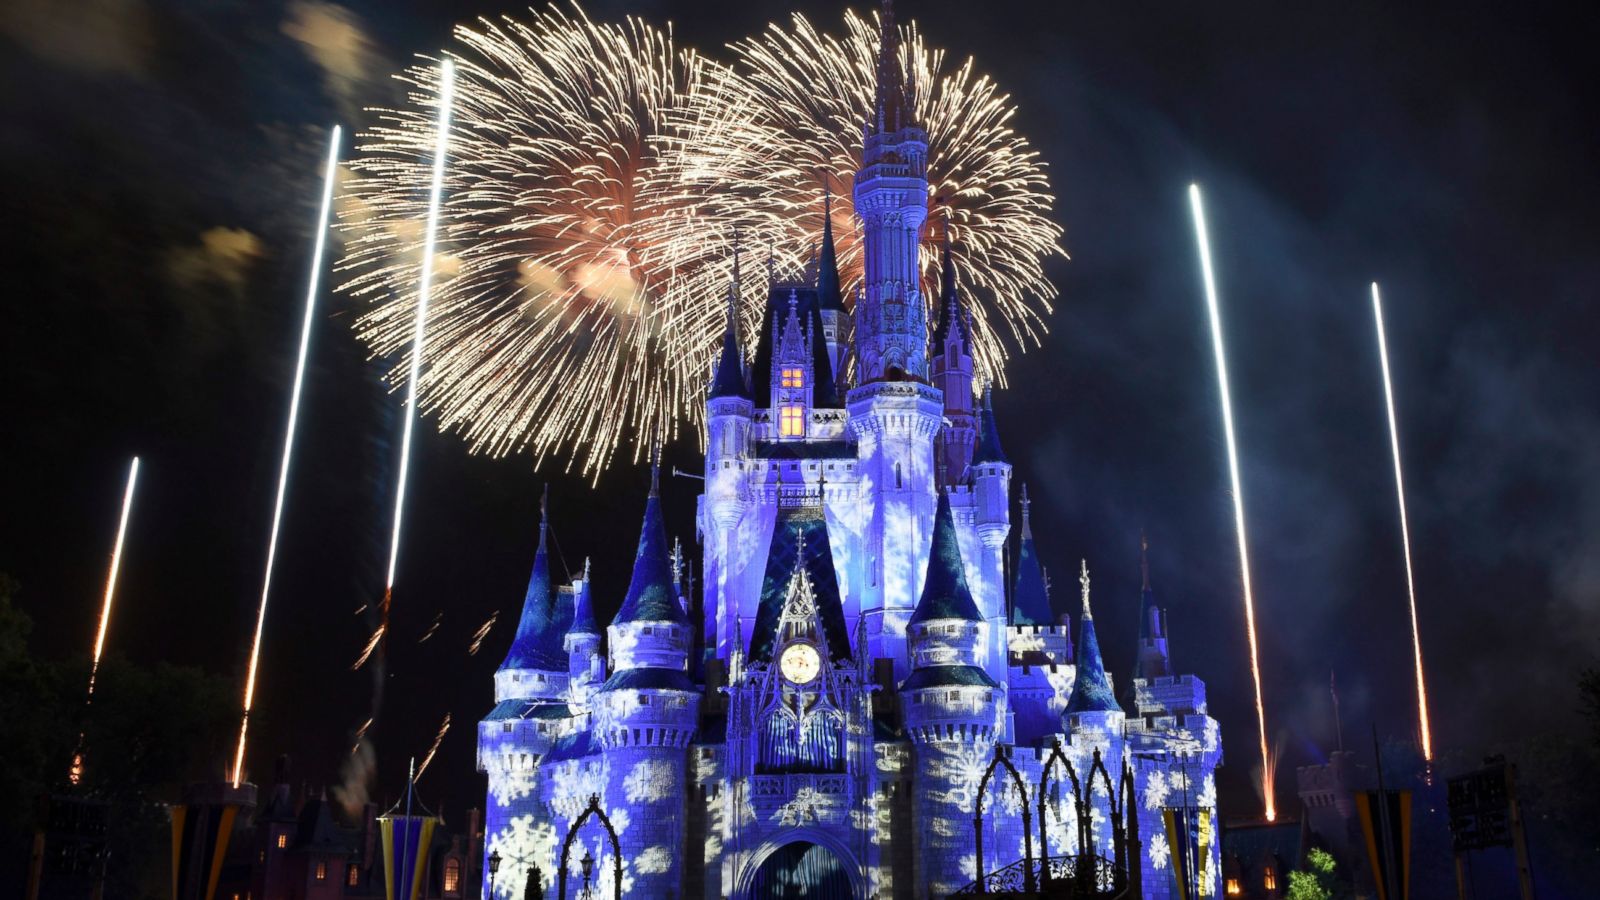 Walt Disney World Resort to be powered up to 40% by the sun - Good Morning  America